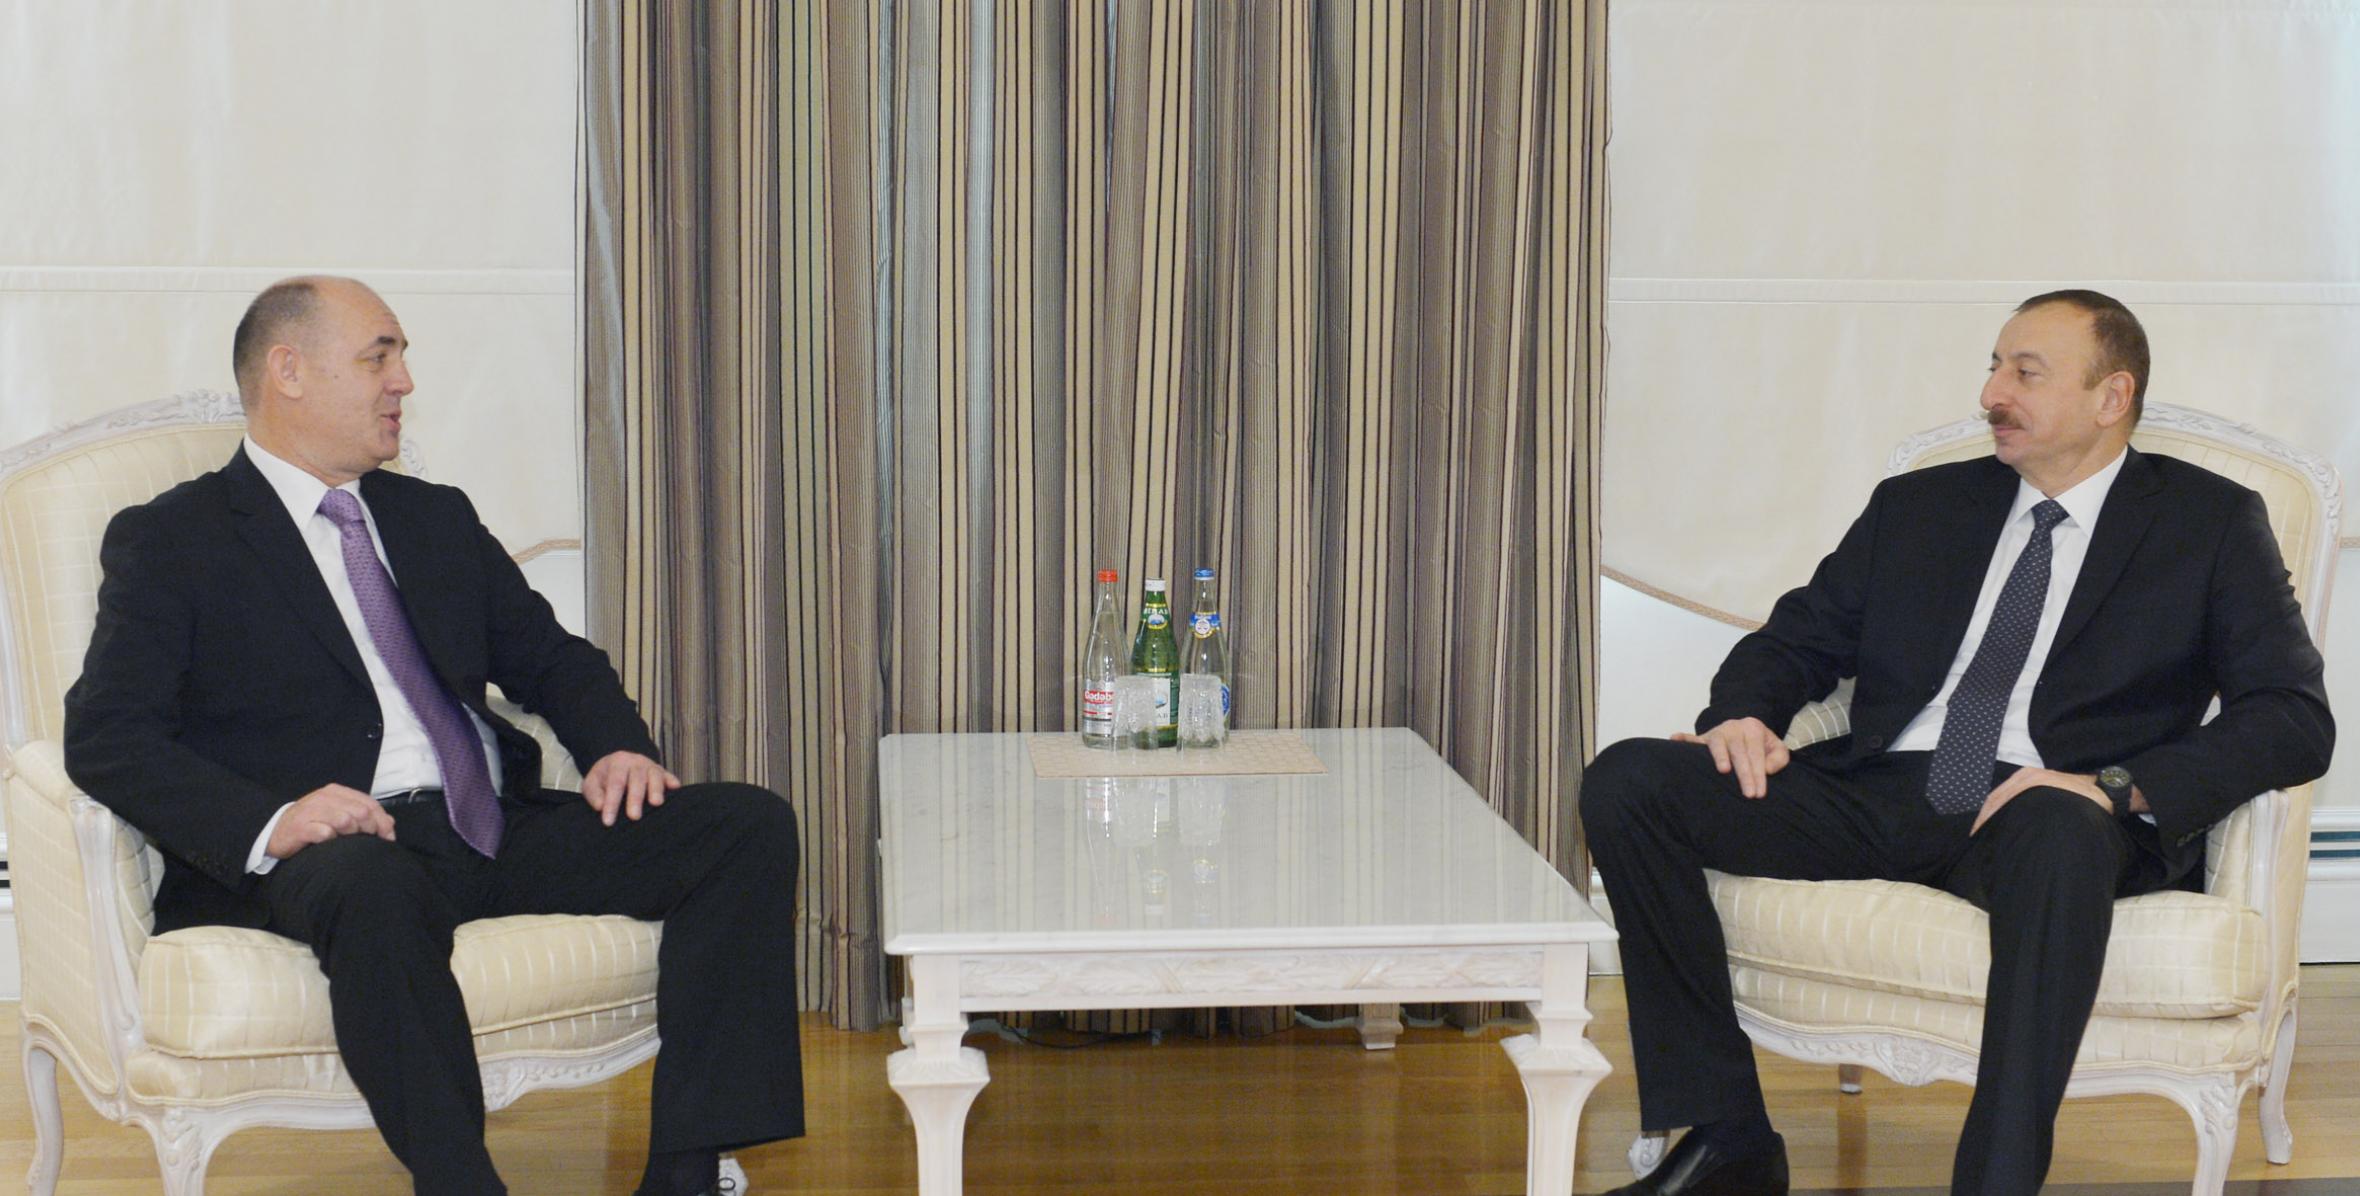 Ilham Aliyev received the Serbian ambassador to Azerbaijan in connection with the completion of his diplomatic mission